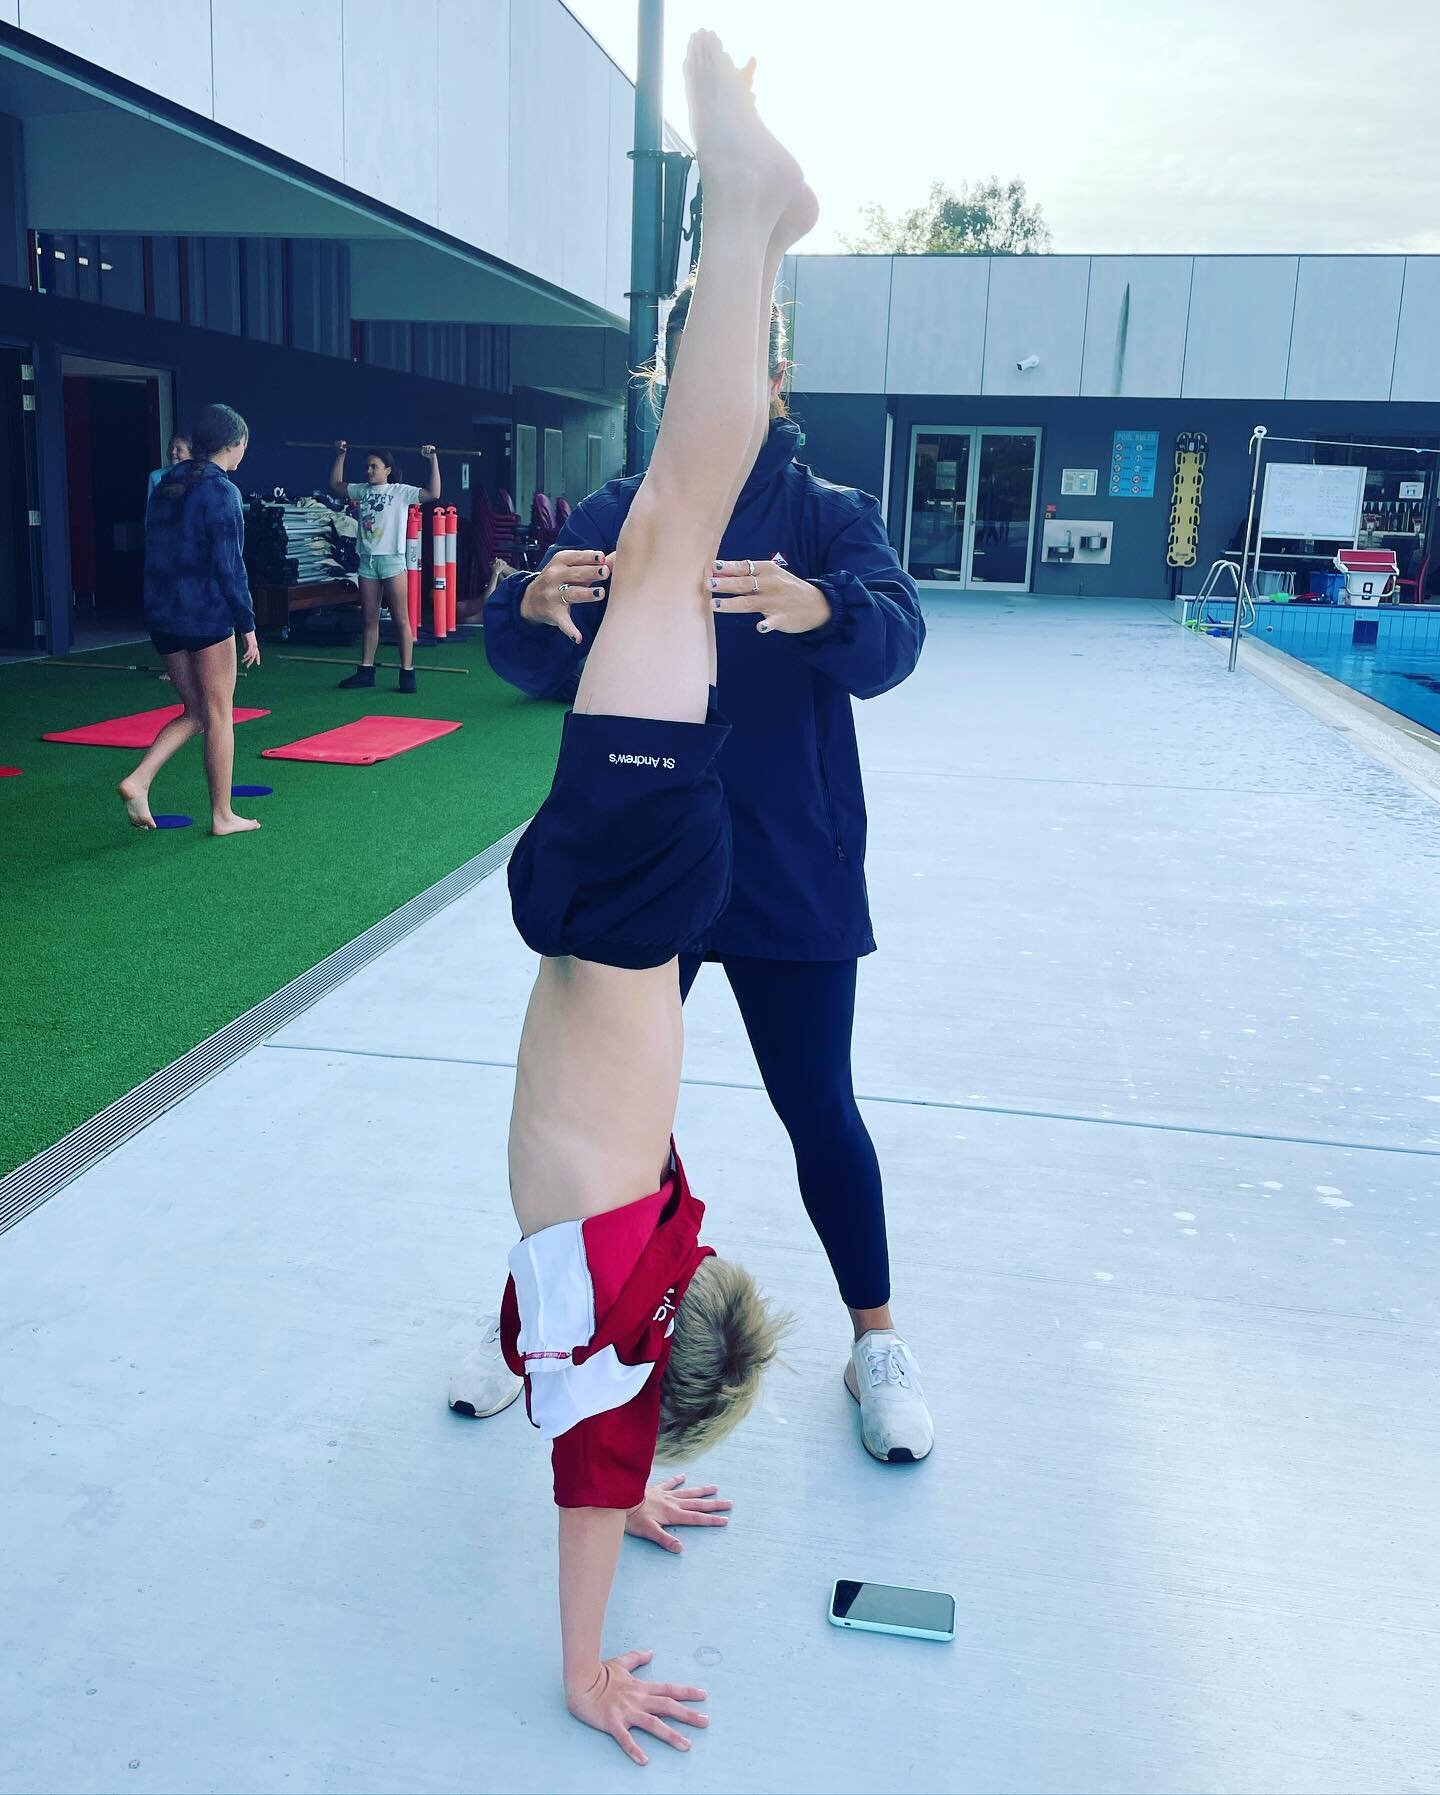 It&rsquo;s term 4 = loads of exercises progressing @standrewsswimming 

1. Handstand balancing in the centre after many terms of getting range and shaping against the wall. How good would this handstand make as a streamline? Not much drag there!

2. 